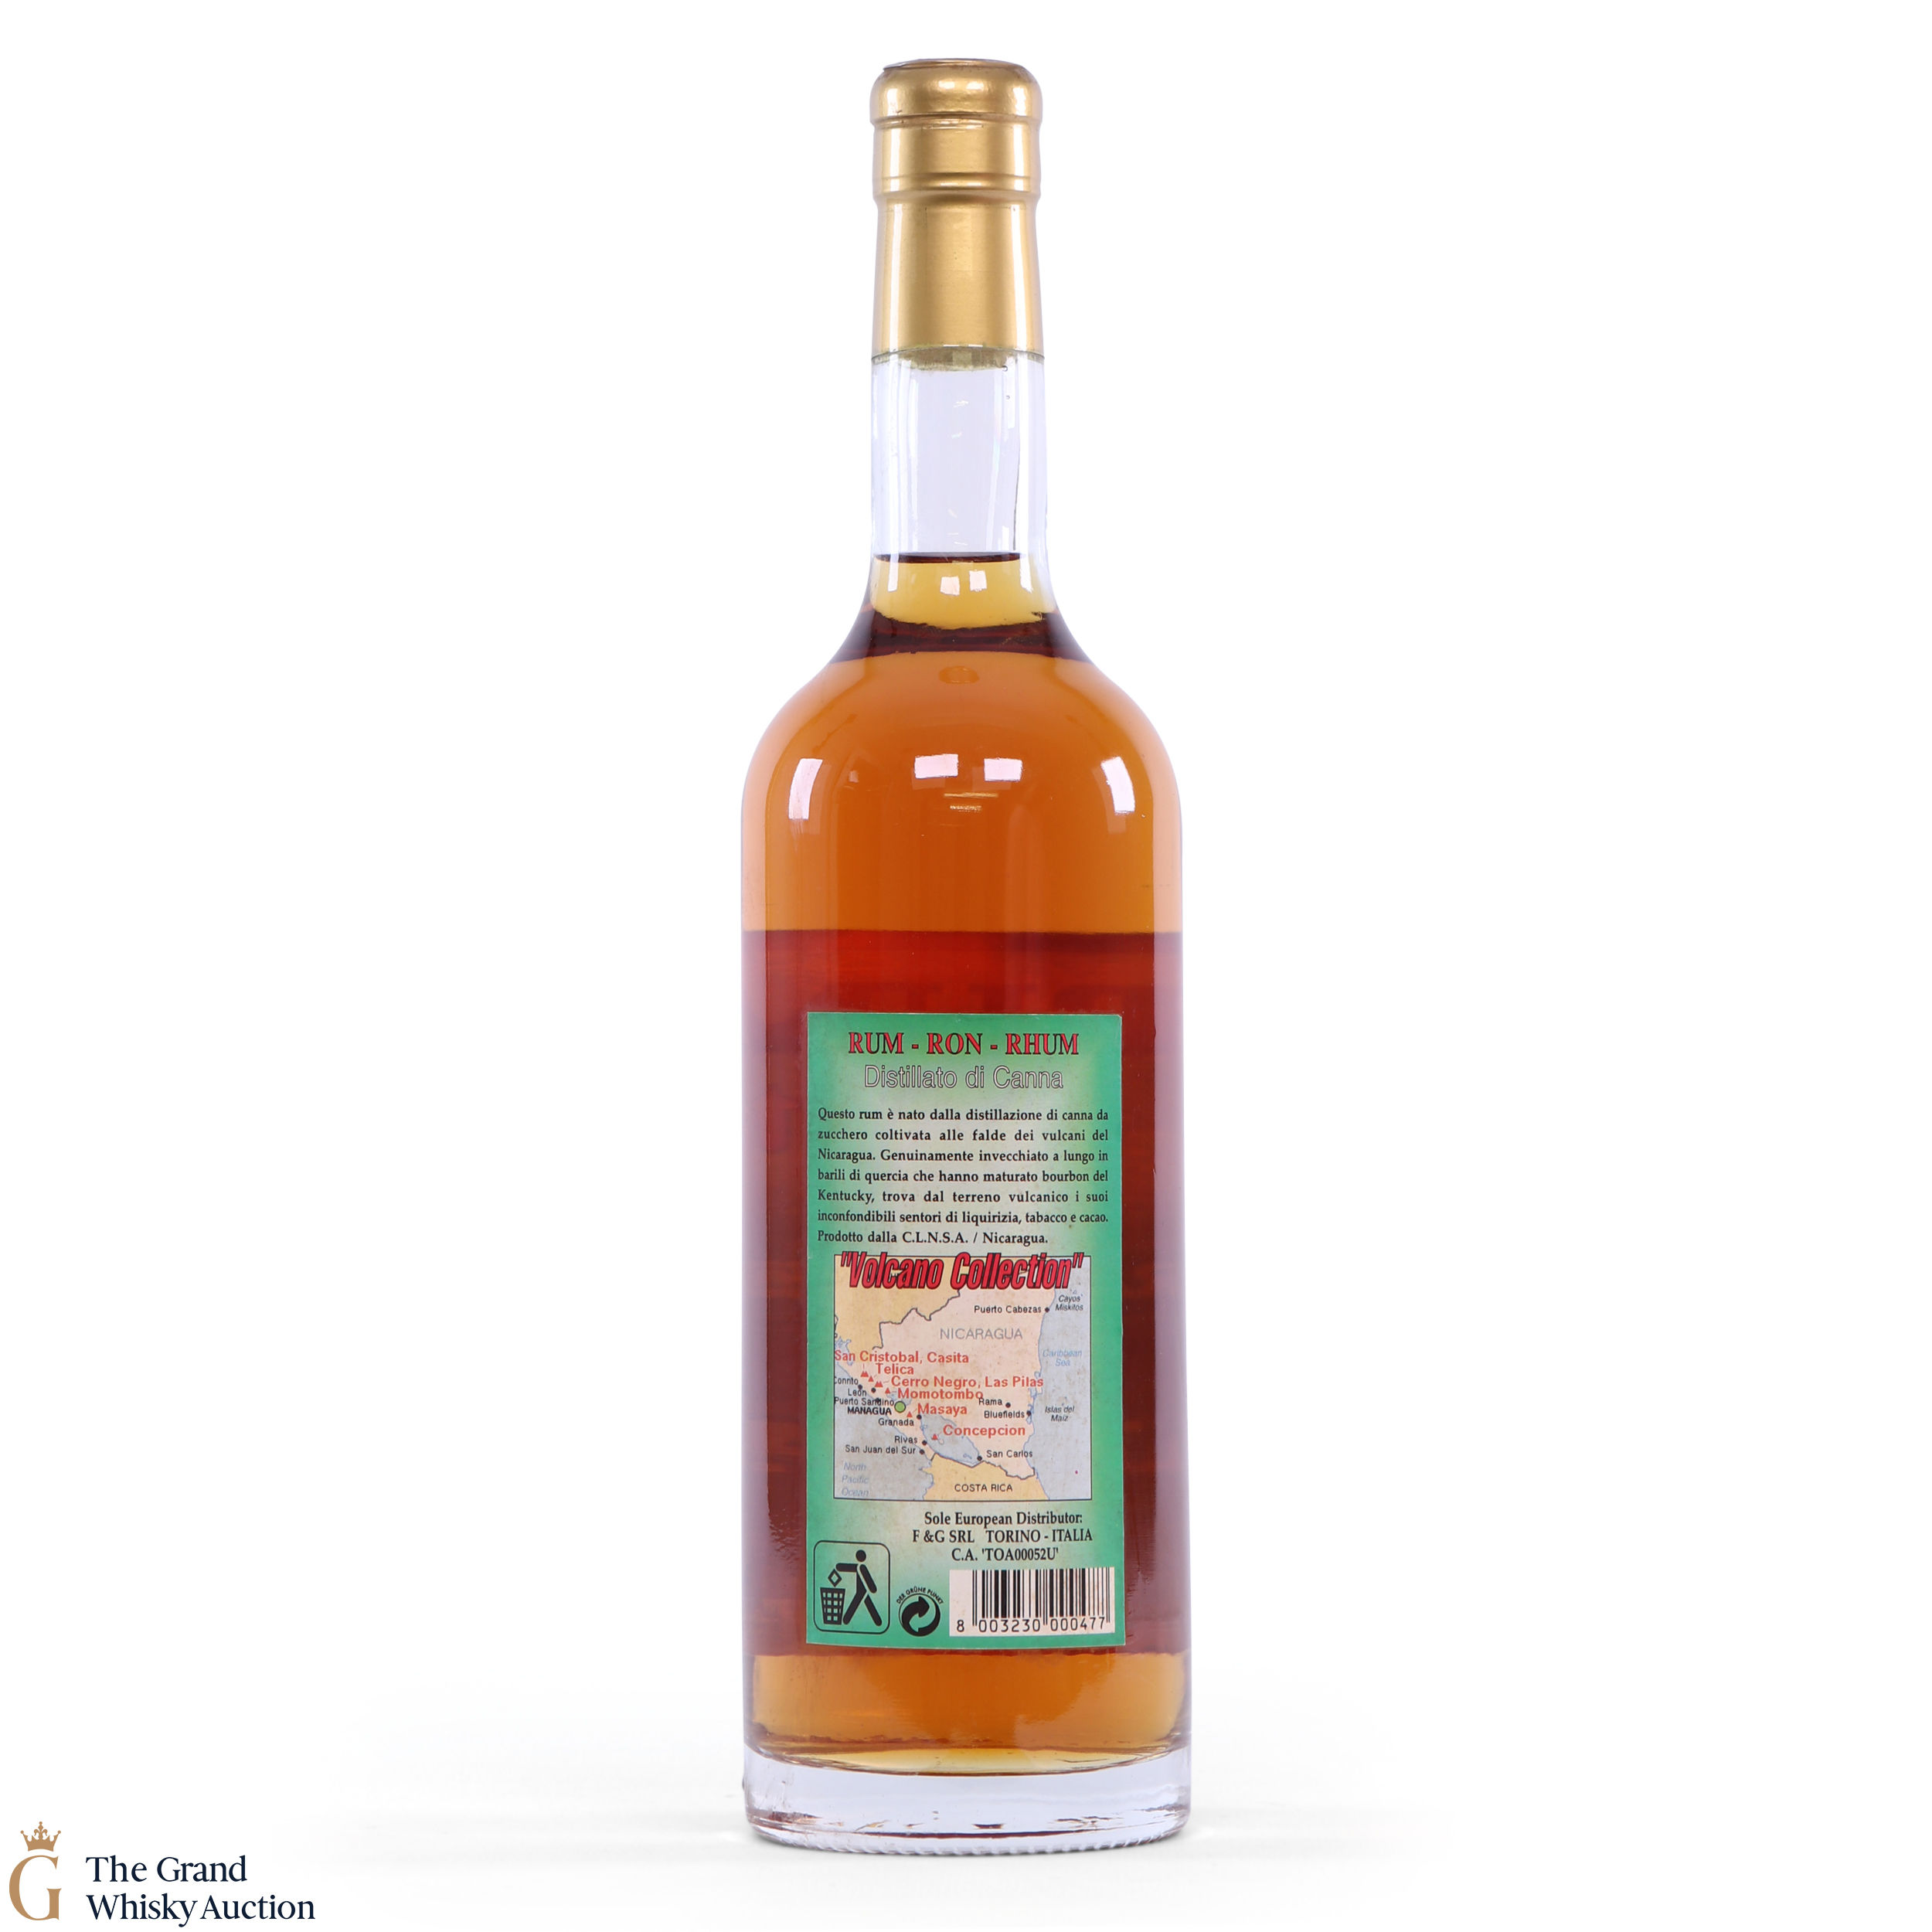 San Cristobal 7 Year Old Gran Reserva Rum Auction The Grand Whisky Auction